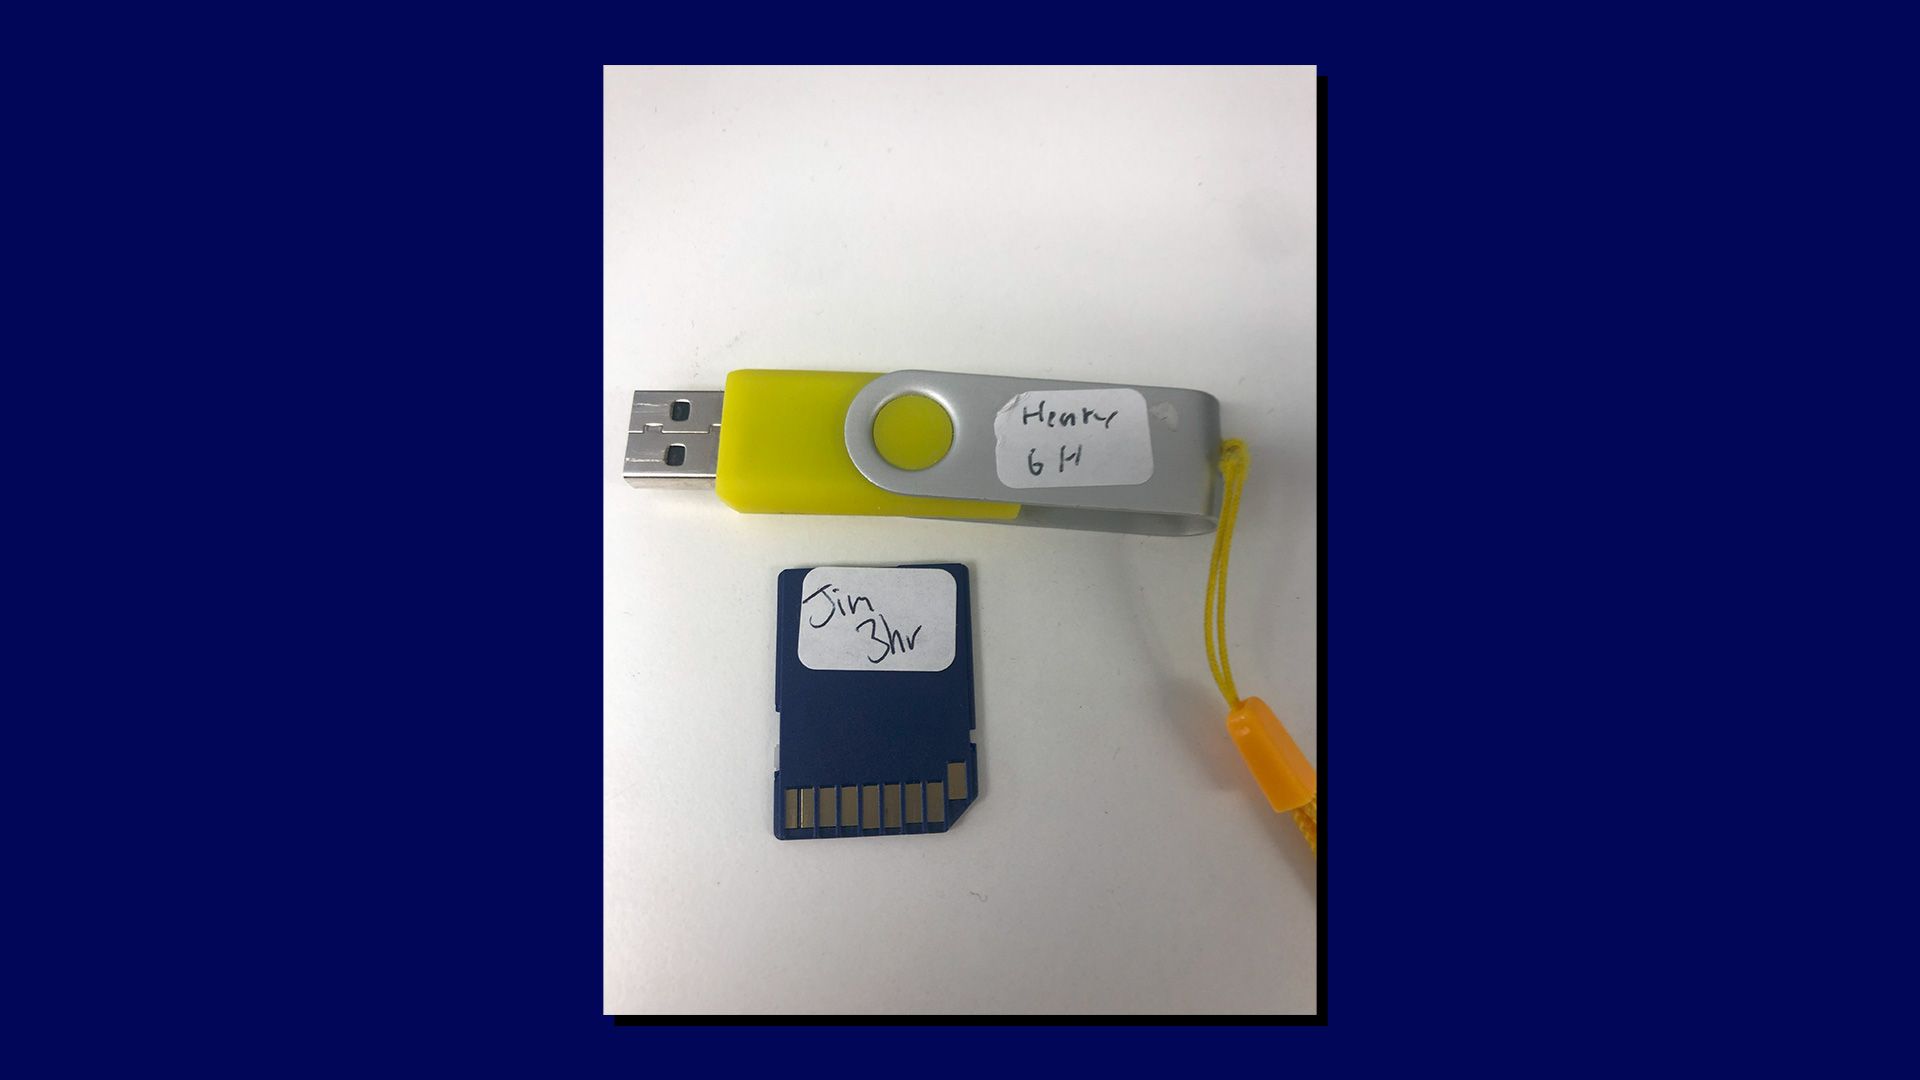 2 USB sticks labelled with student names and print durations.